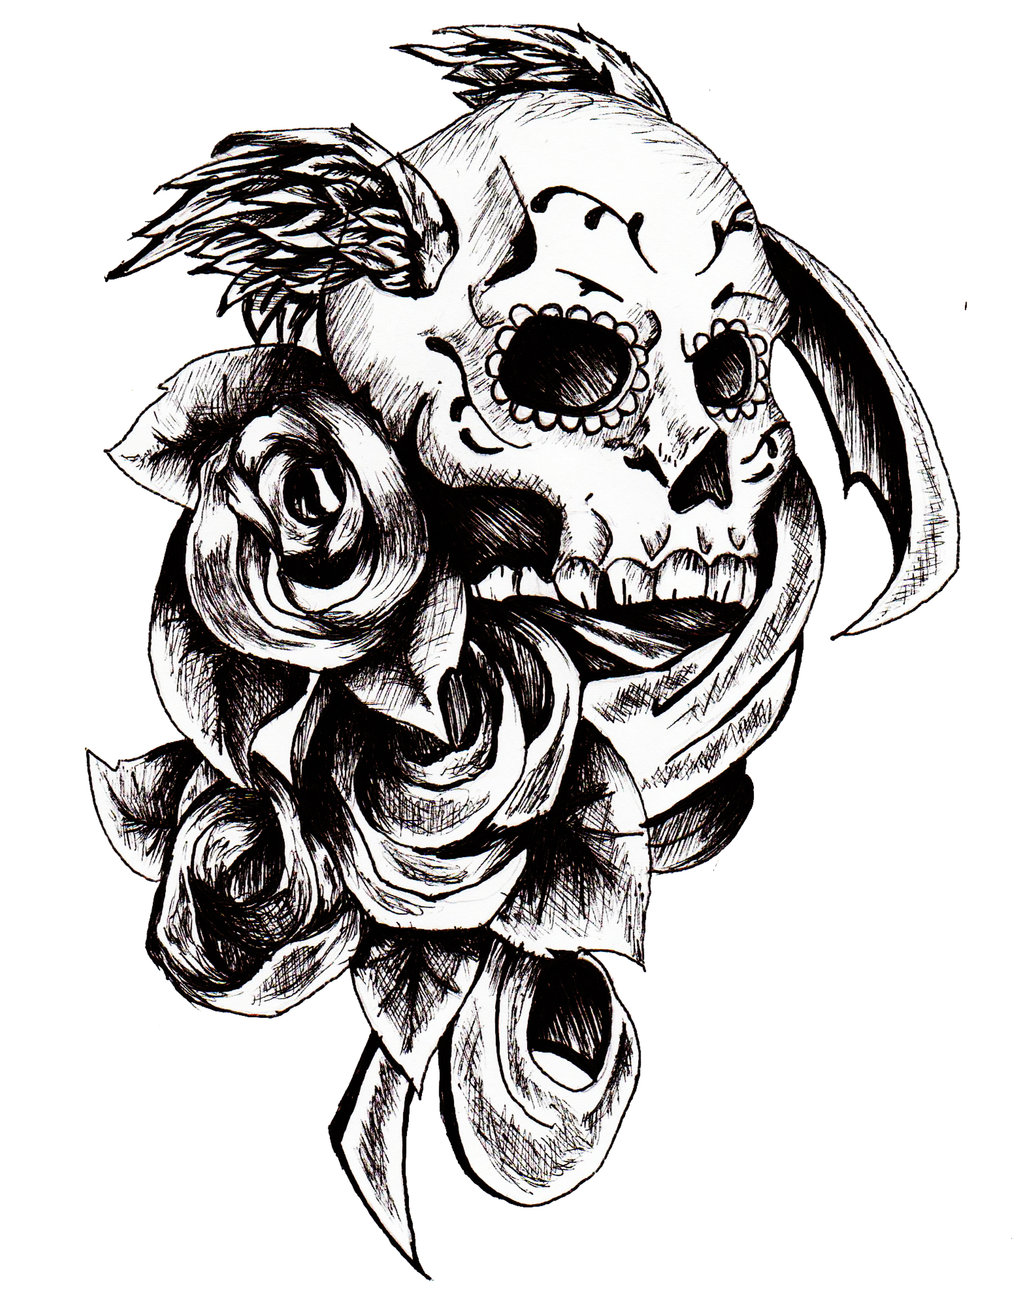 Impressive Black Ink Pirate Skull With Roses Tattoo Design By AmitchDesigns